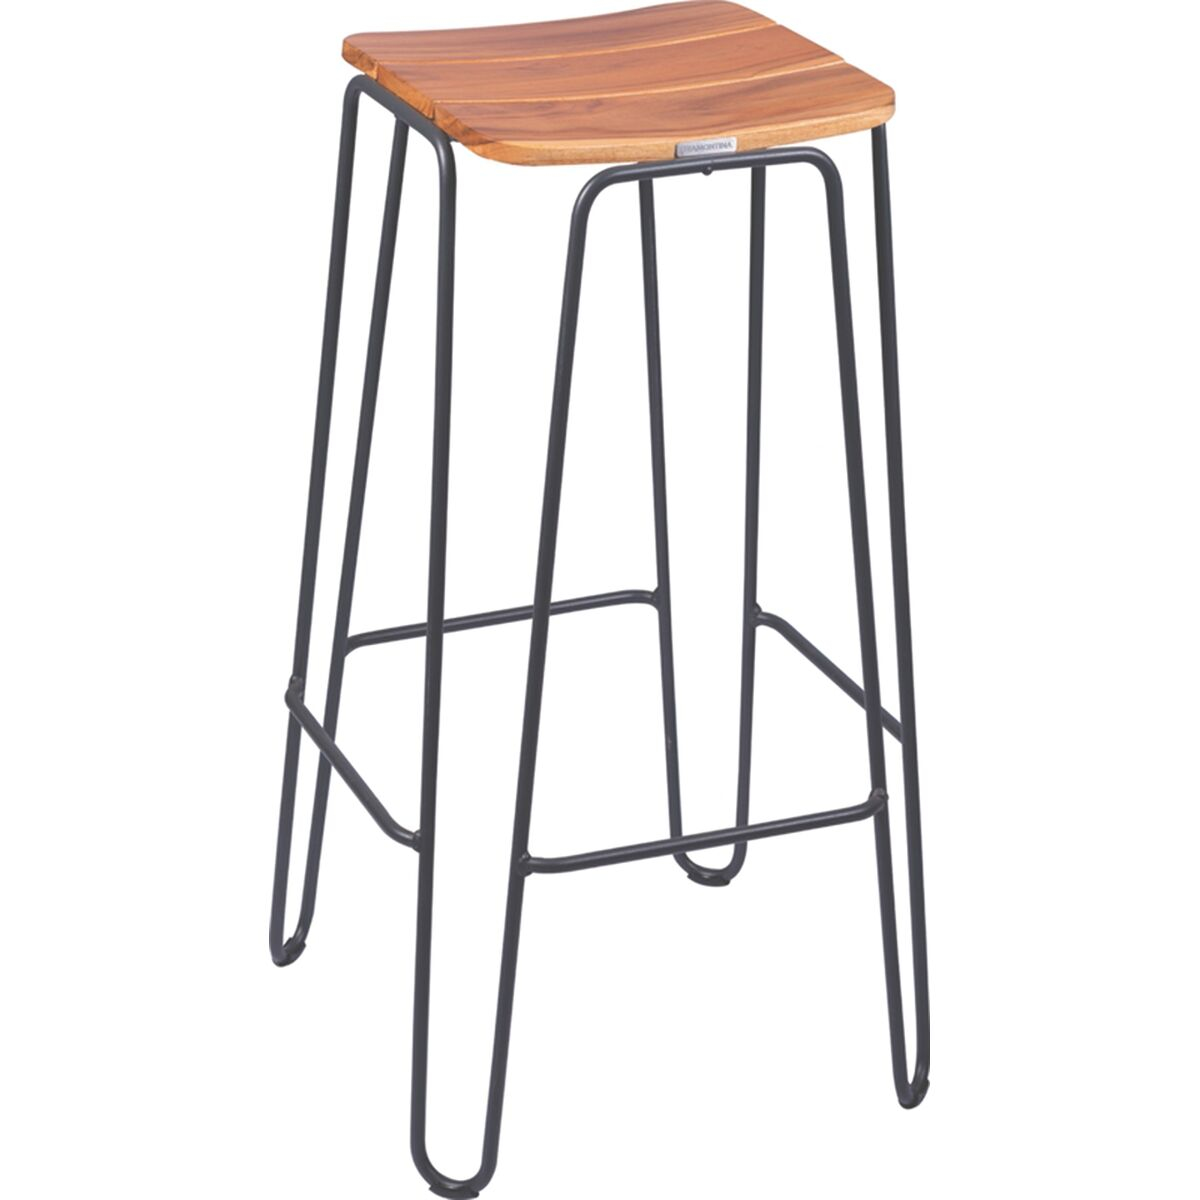 Tramontina Tarsila High Stool in Teak Wood with Carbon Steel Structure and Graphite Ecoclear Finish